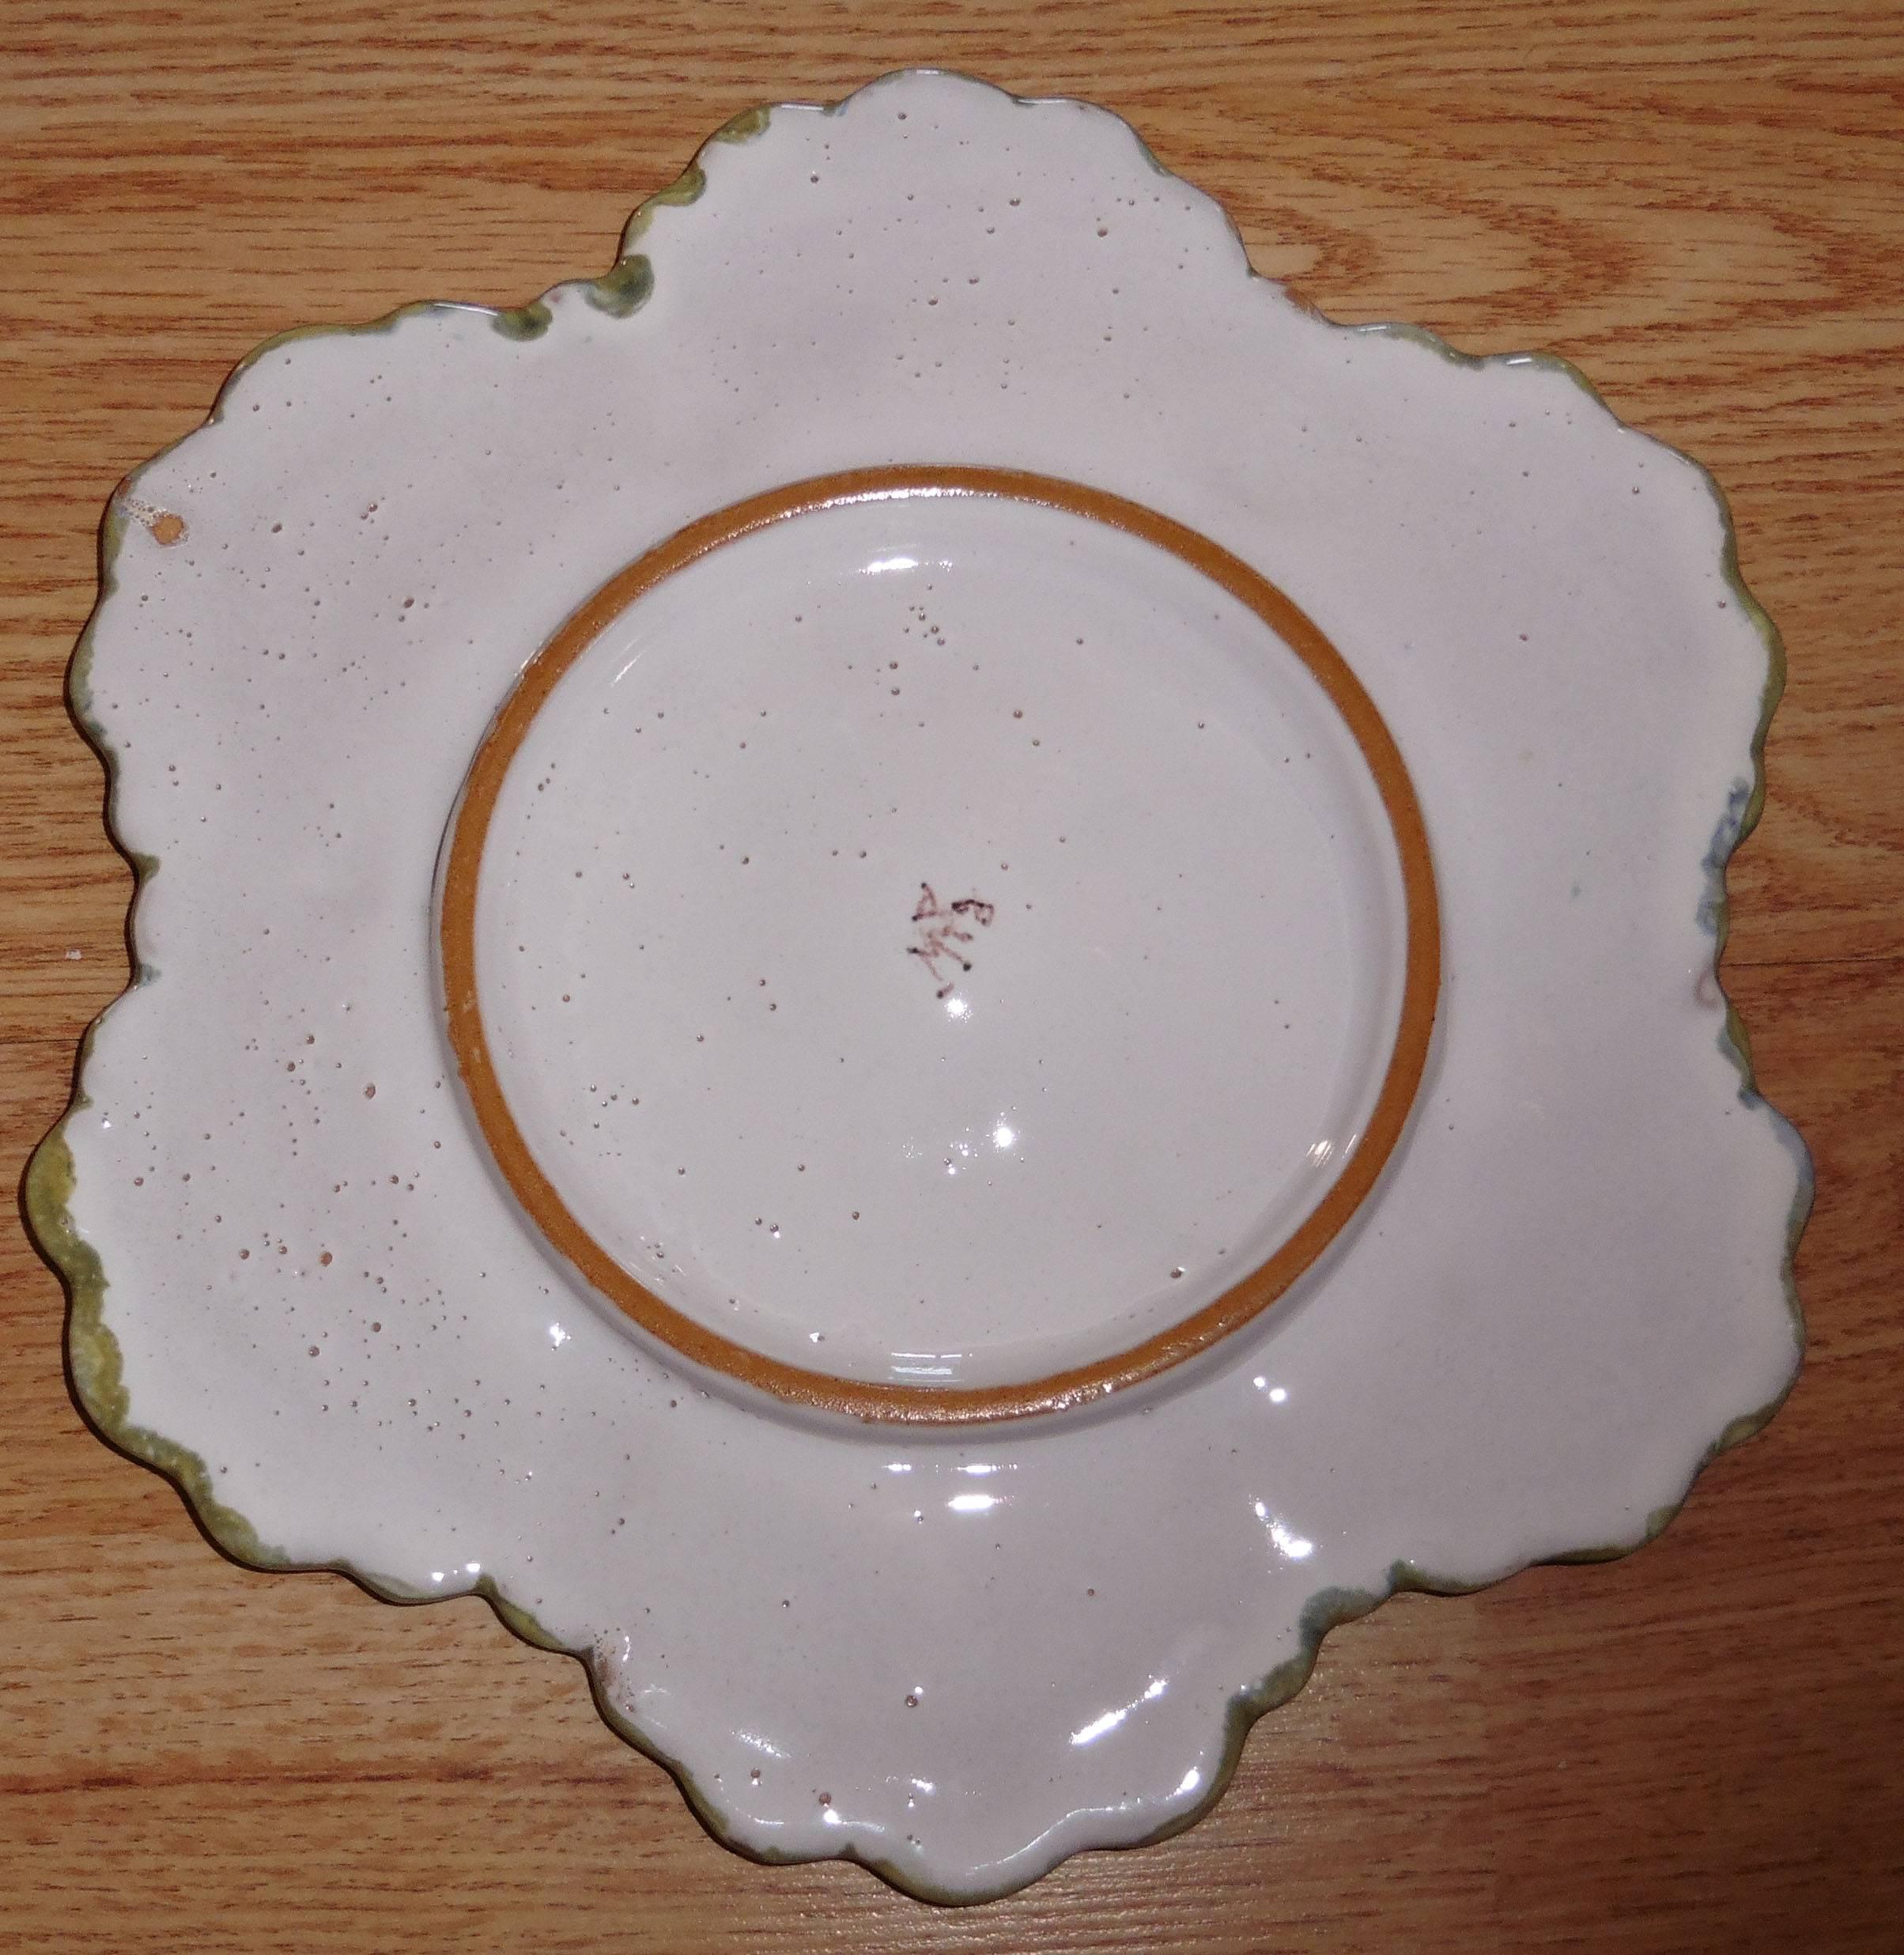 French faience oyster plate signed Martres-Tolosane, circa 1940.
Good conditions, some cooking bubbles on the glaze.